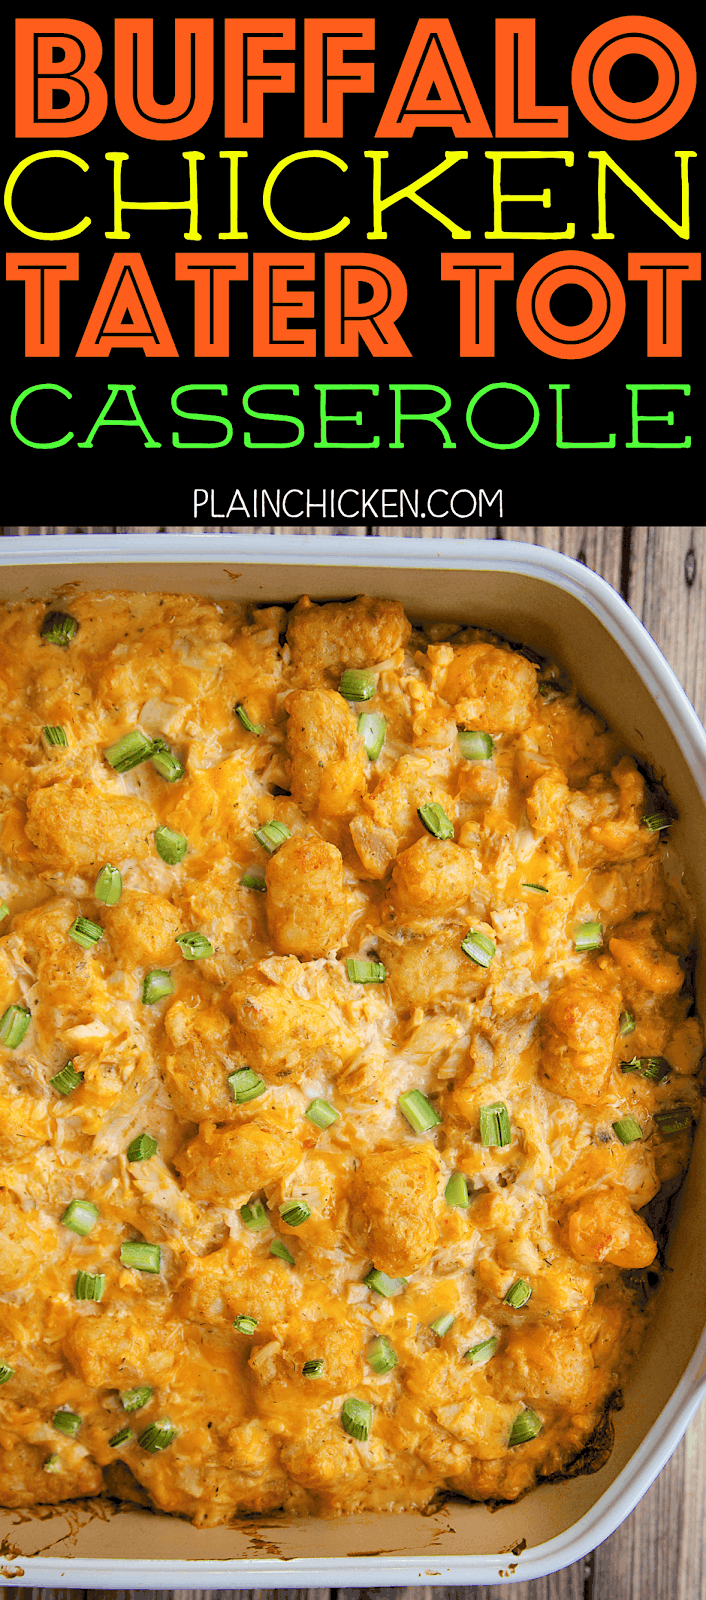 Buffalo Chicken Tater Tot Casserole - SO good! Great casserole for a potluck or watching football!! Everyone LOVES this recipe! Chicken, sour cream, cream of chicken soup, buffalo wing sauce, cheddar cheese, tater tots and celery. Can make ahead and freeze for later. 